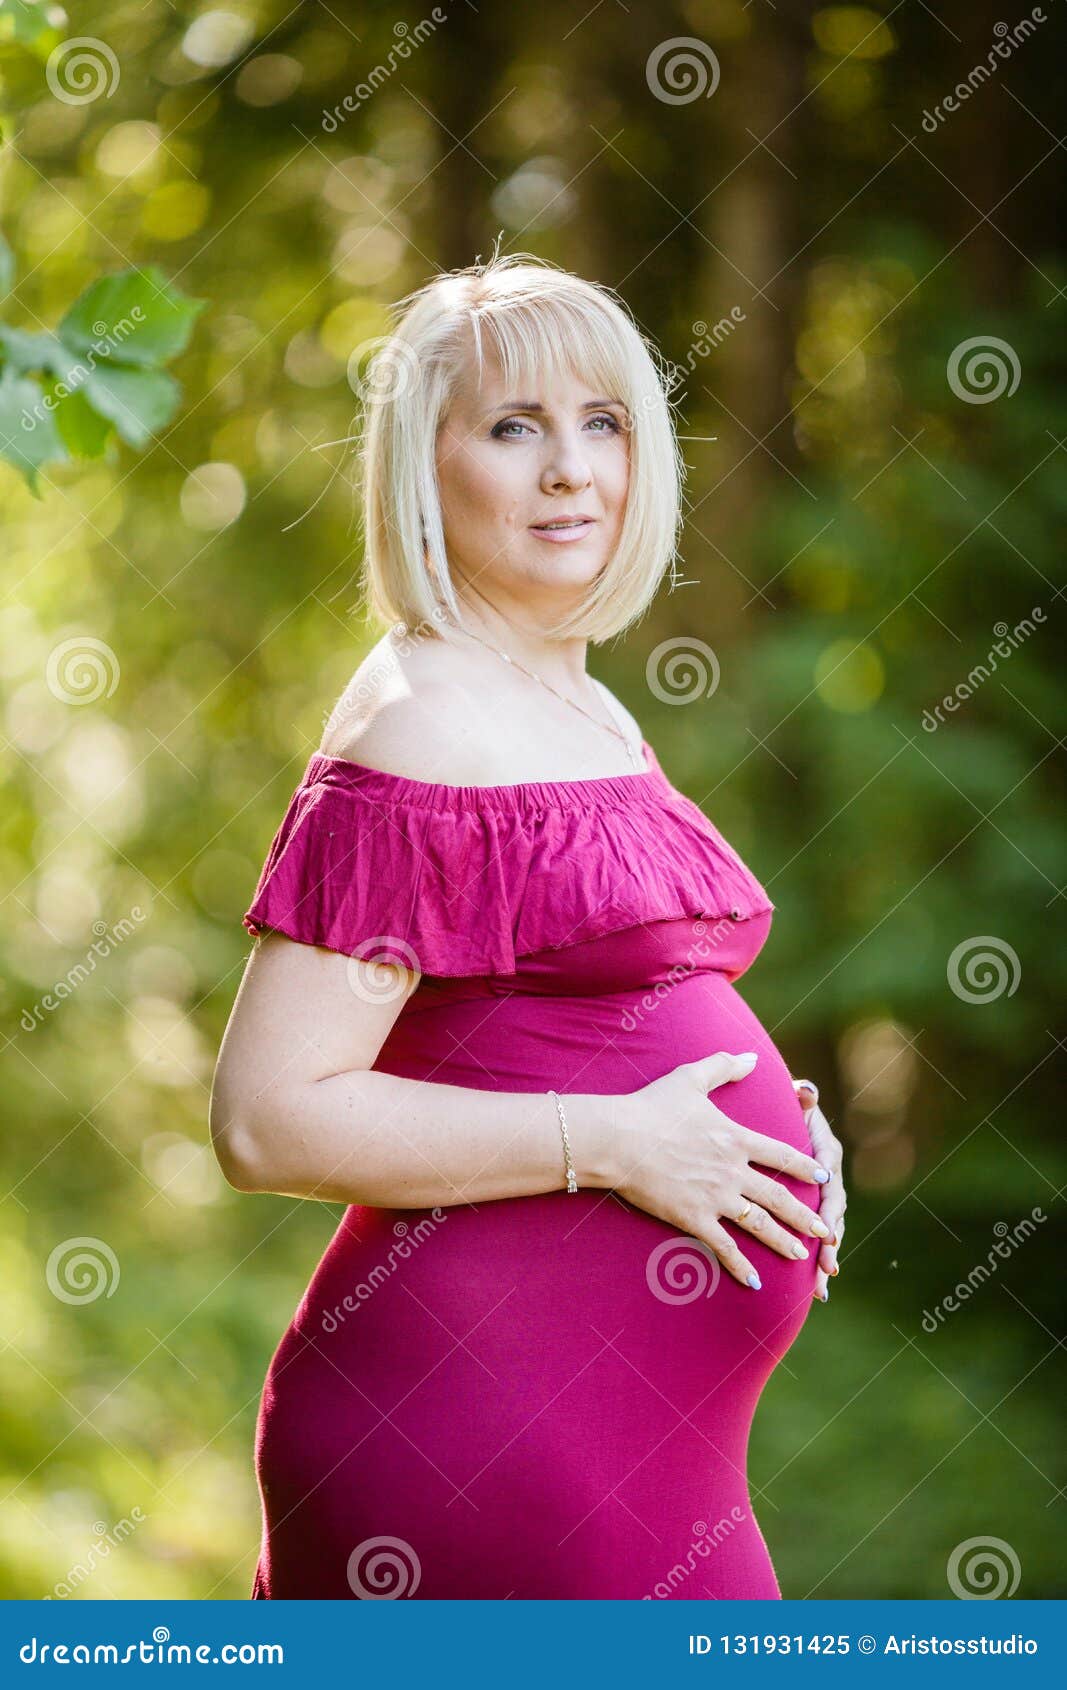 Beautiful Pregnant Woman In Stylish Long Purple Maternity Dress With Ruffles Looking Dreamy In